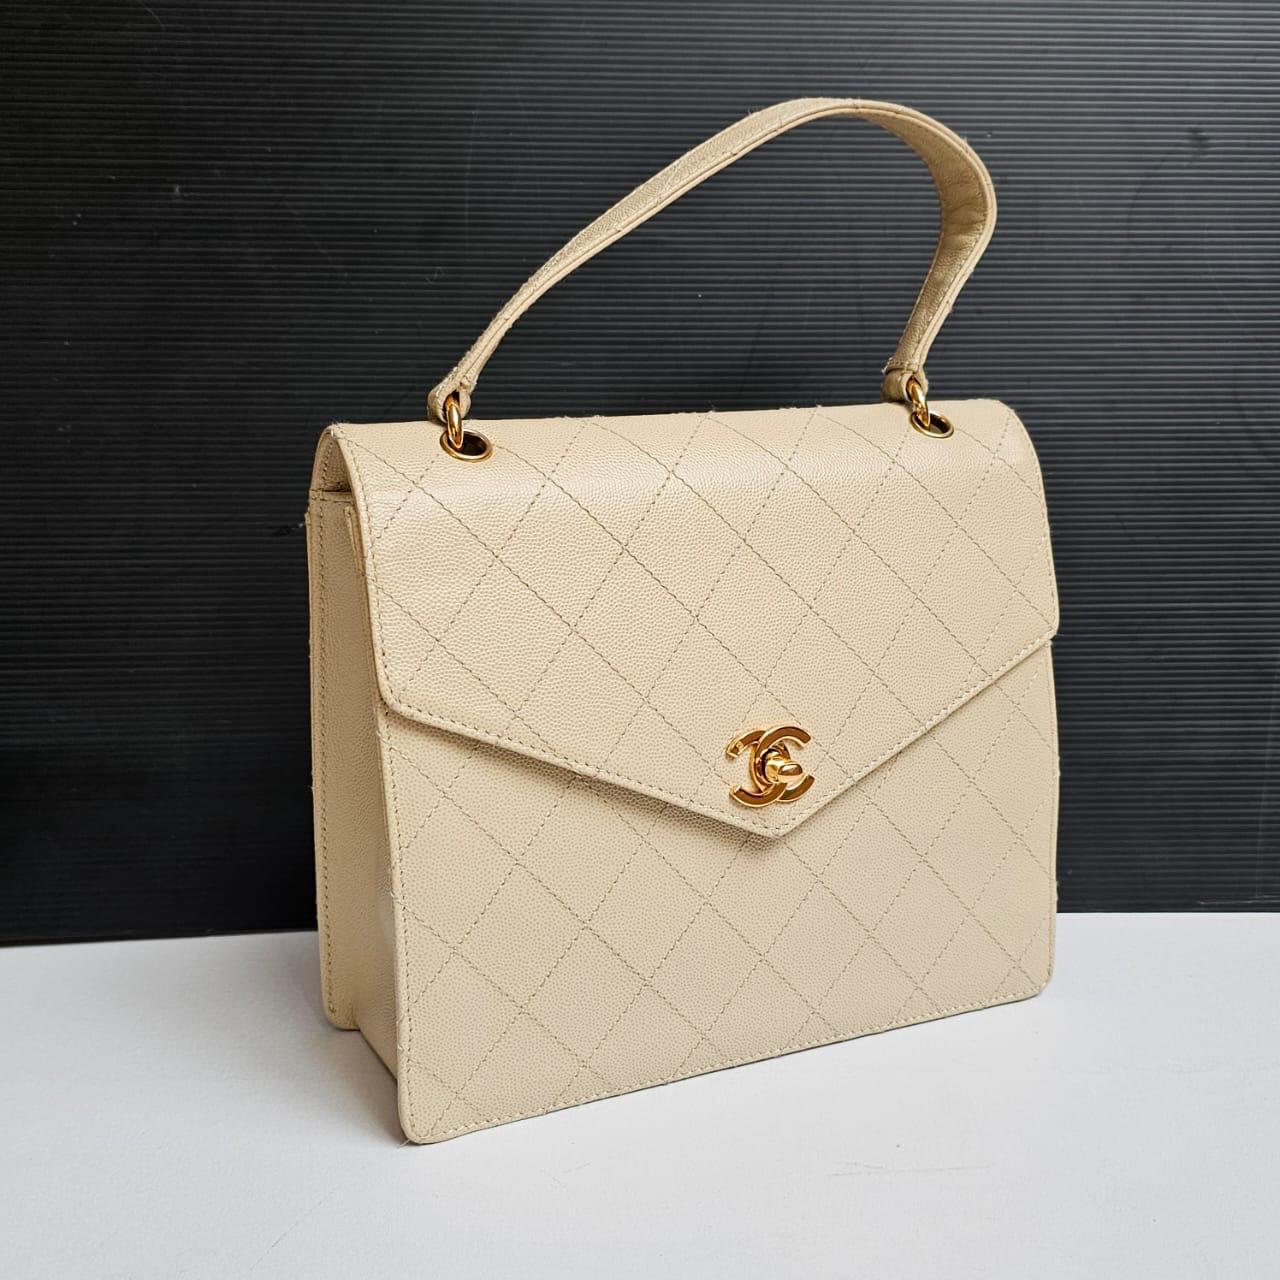 Vintage Chanel Beige Caviar Quilted Top Handle Bag For Sale 4